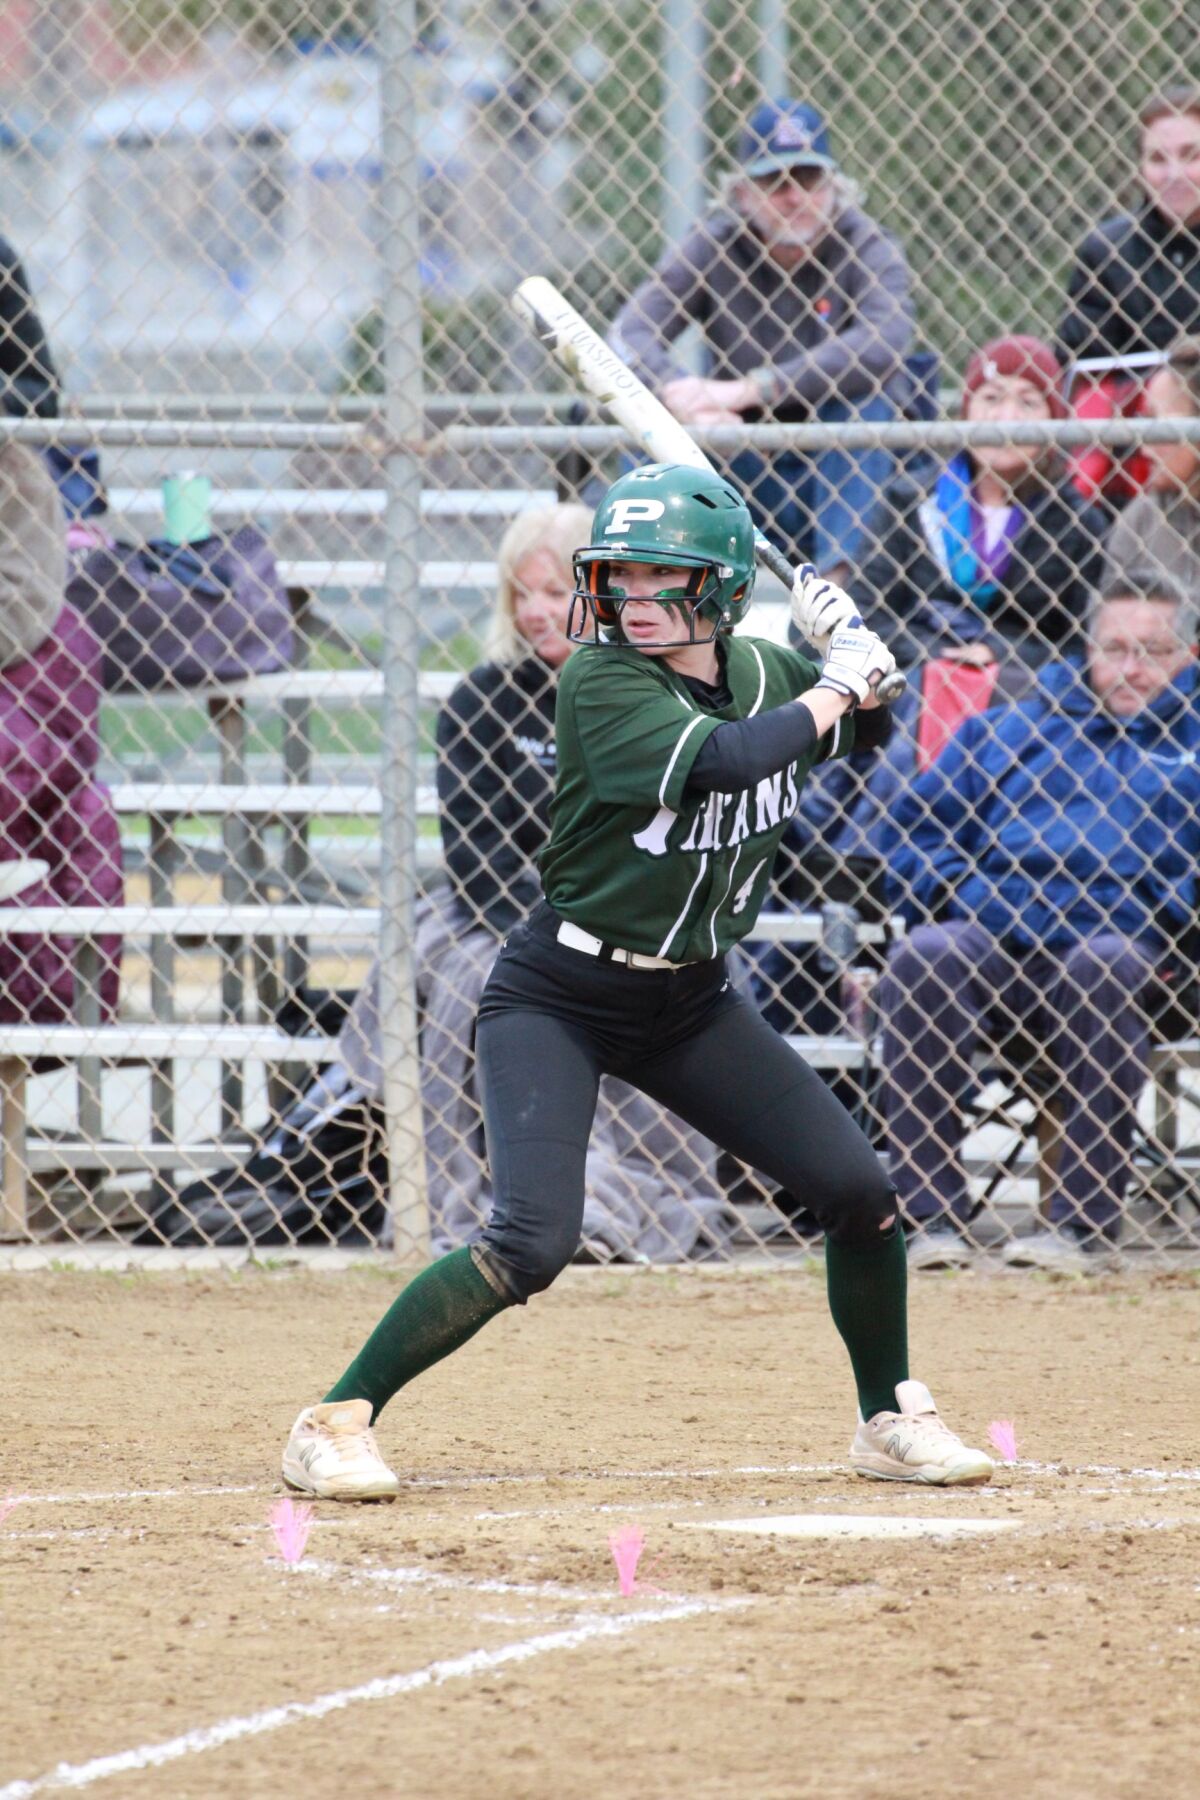 Hailey Burns is hitting .333 with eight RBIs and 13 runs scored from her leadoff spot in the batting order.